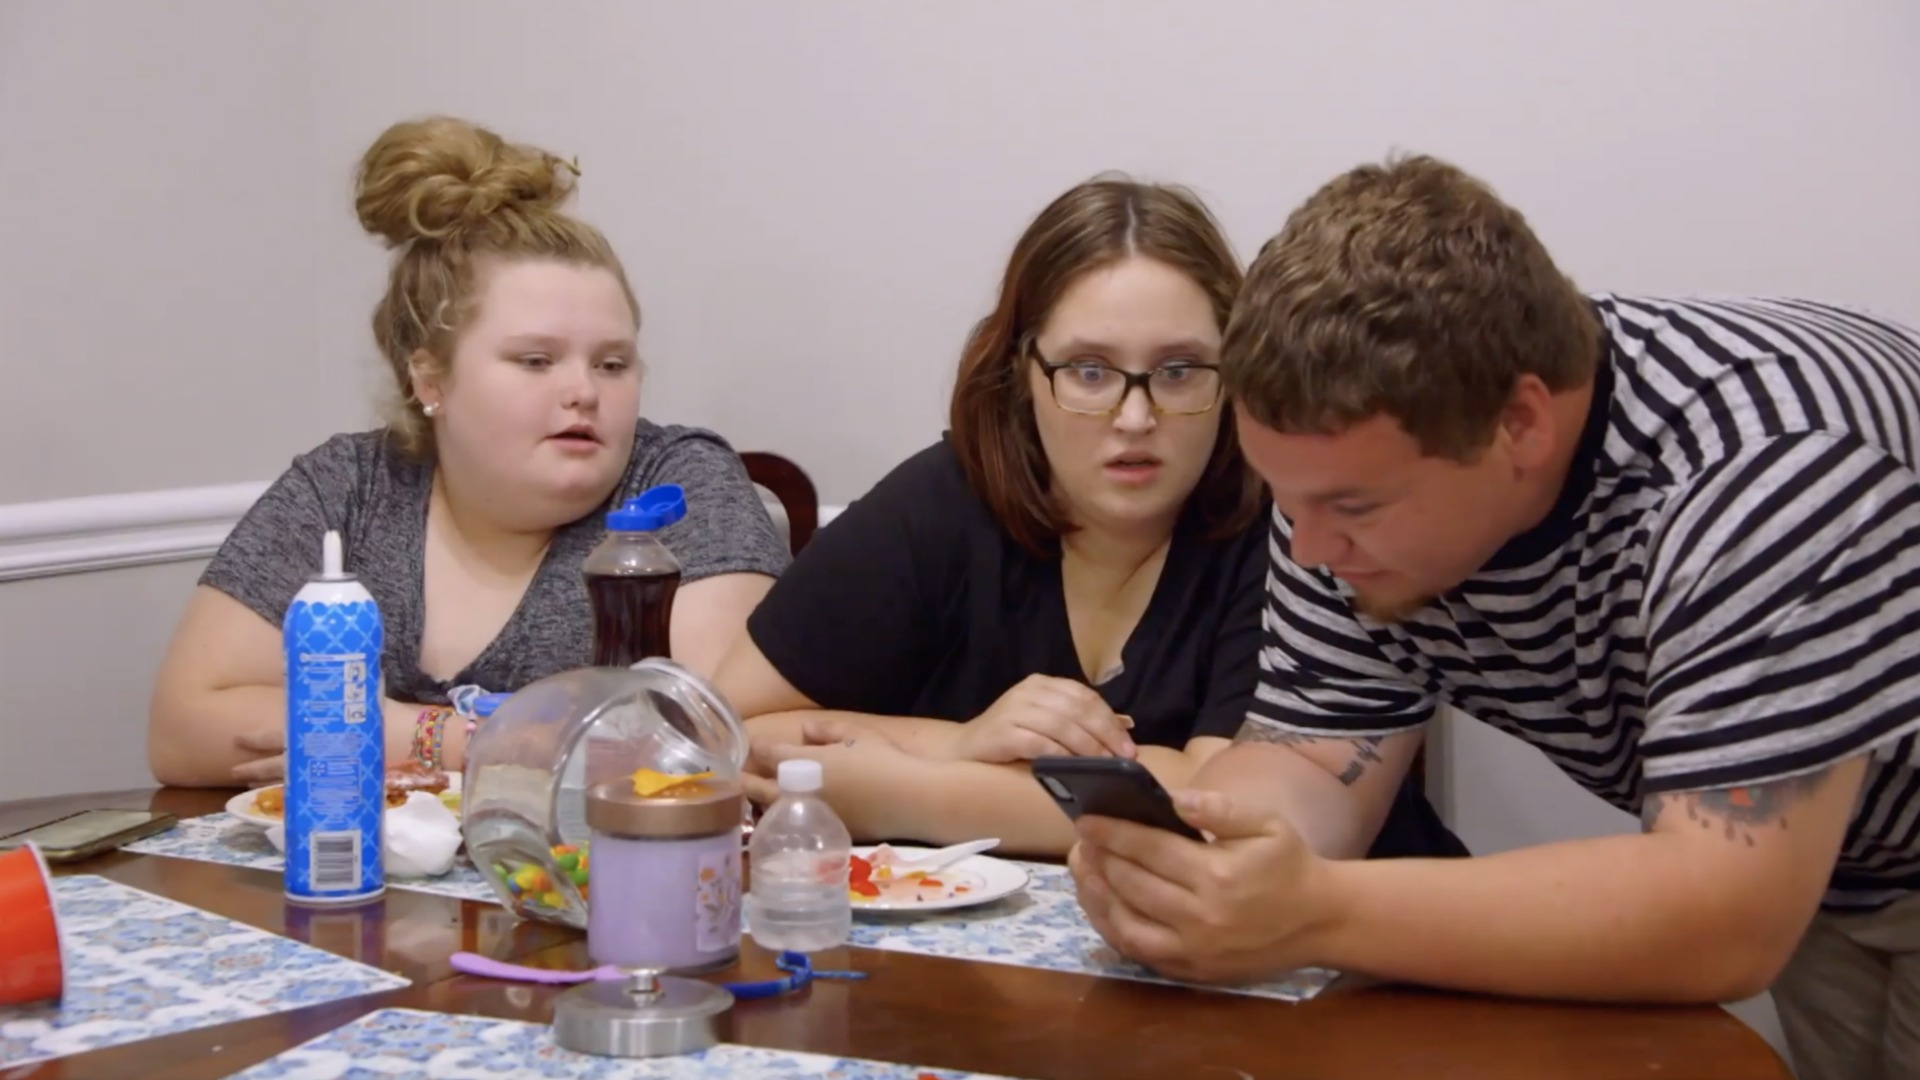 Watch Sneak Peek: The Family Makes a Shocking Discovery | Mama June: From Not to Hot Video Extras